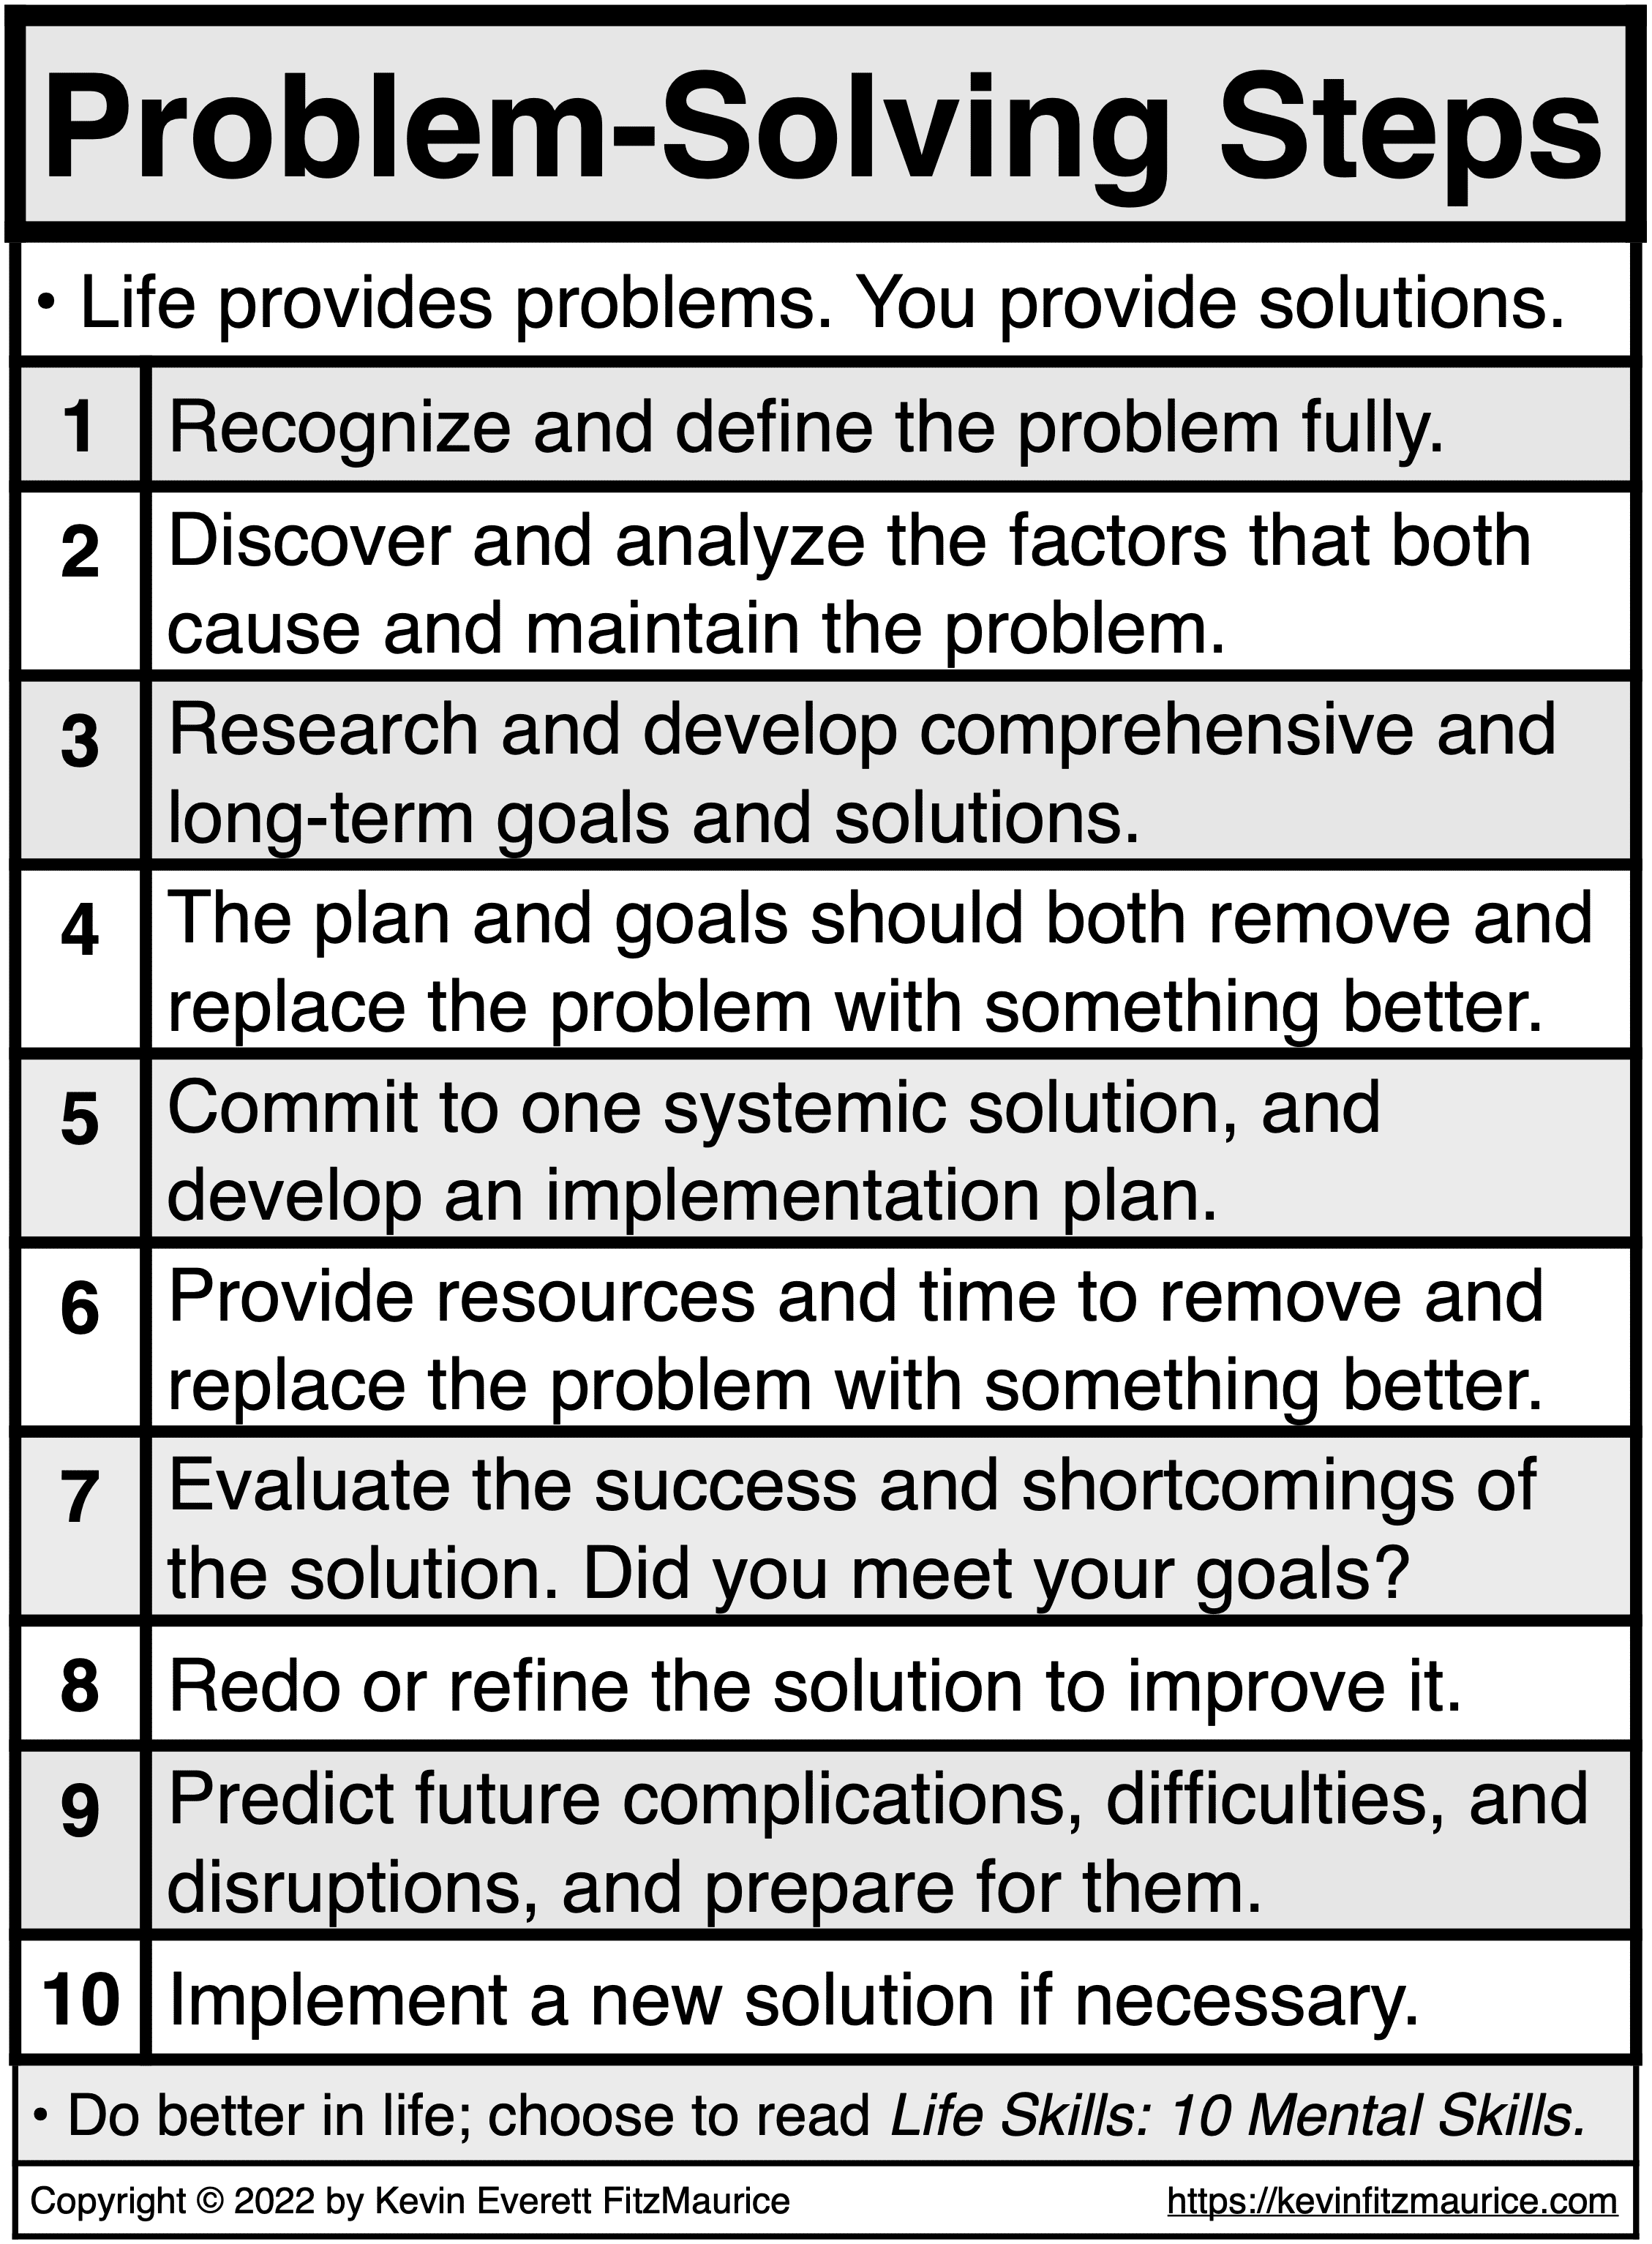 Learn to Problem-Solve Step by Step